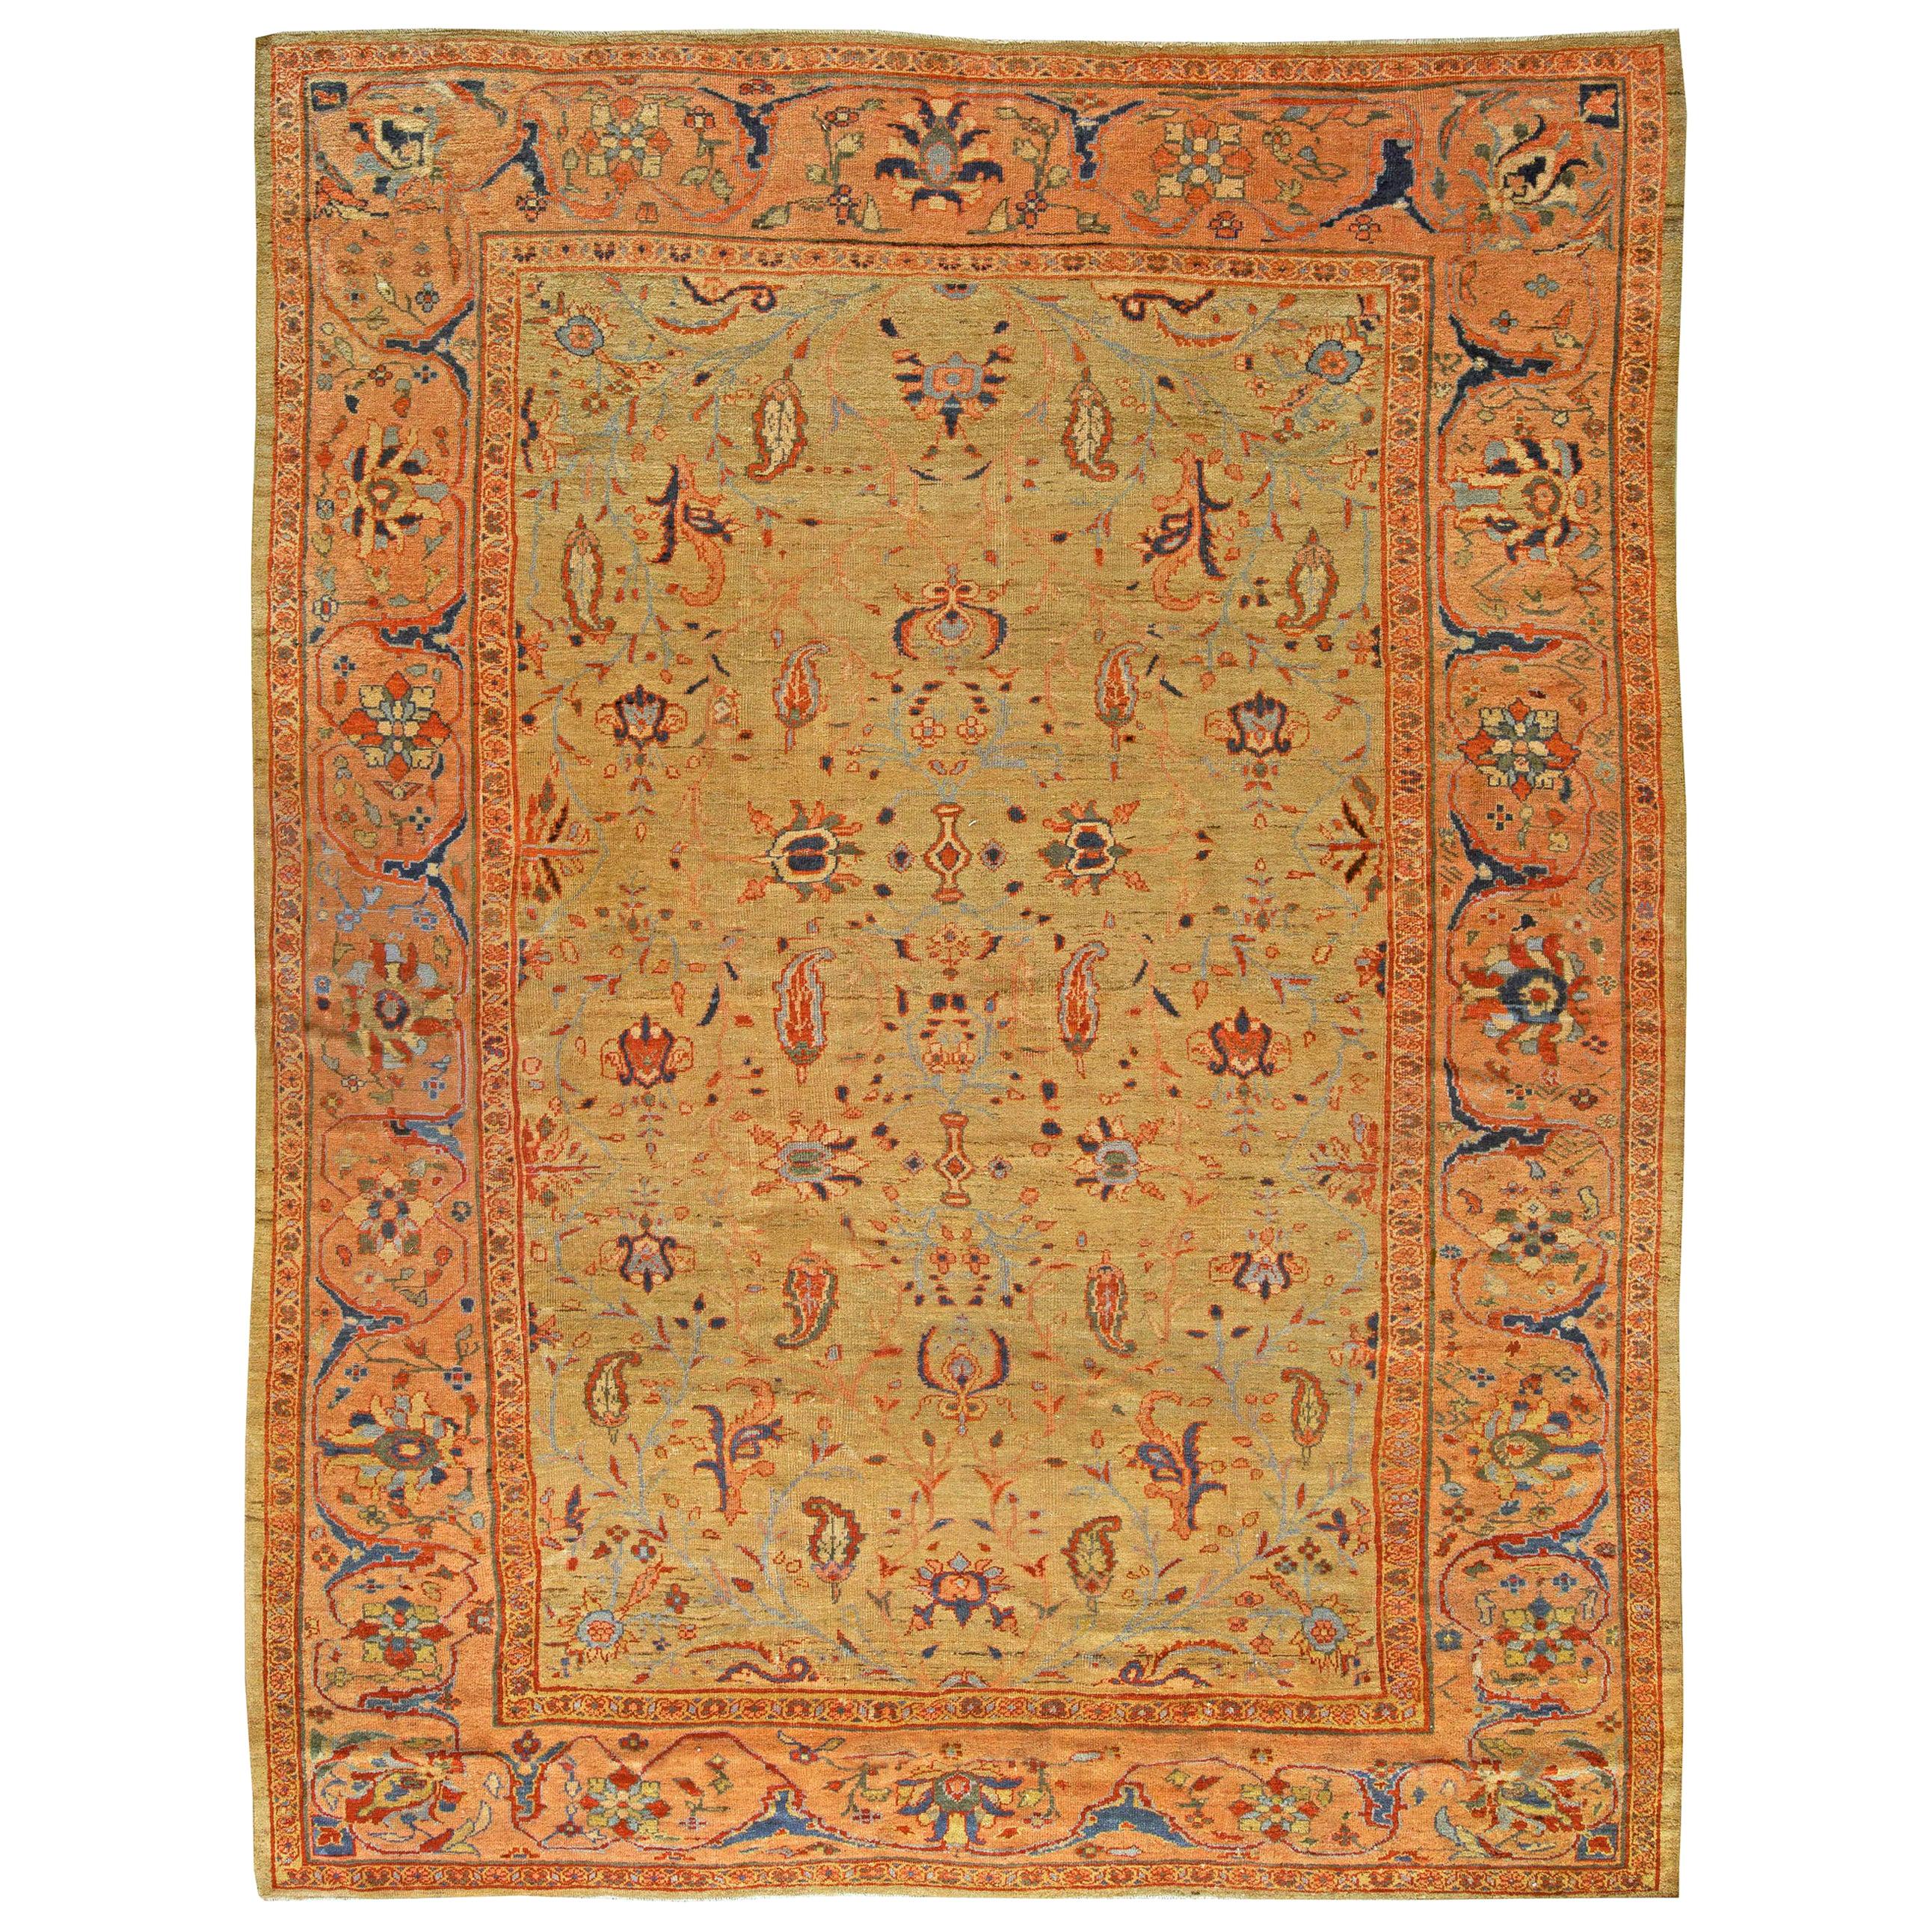 Authentic Early 20th Century Persian Sultanabad Rug